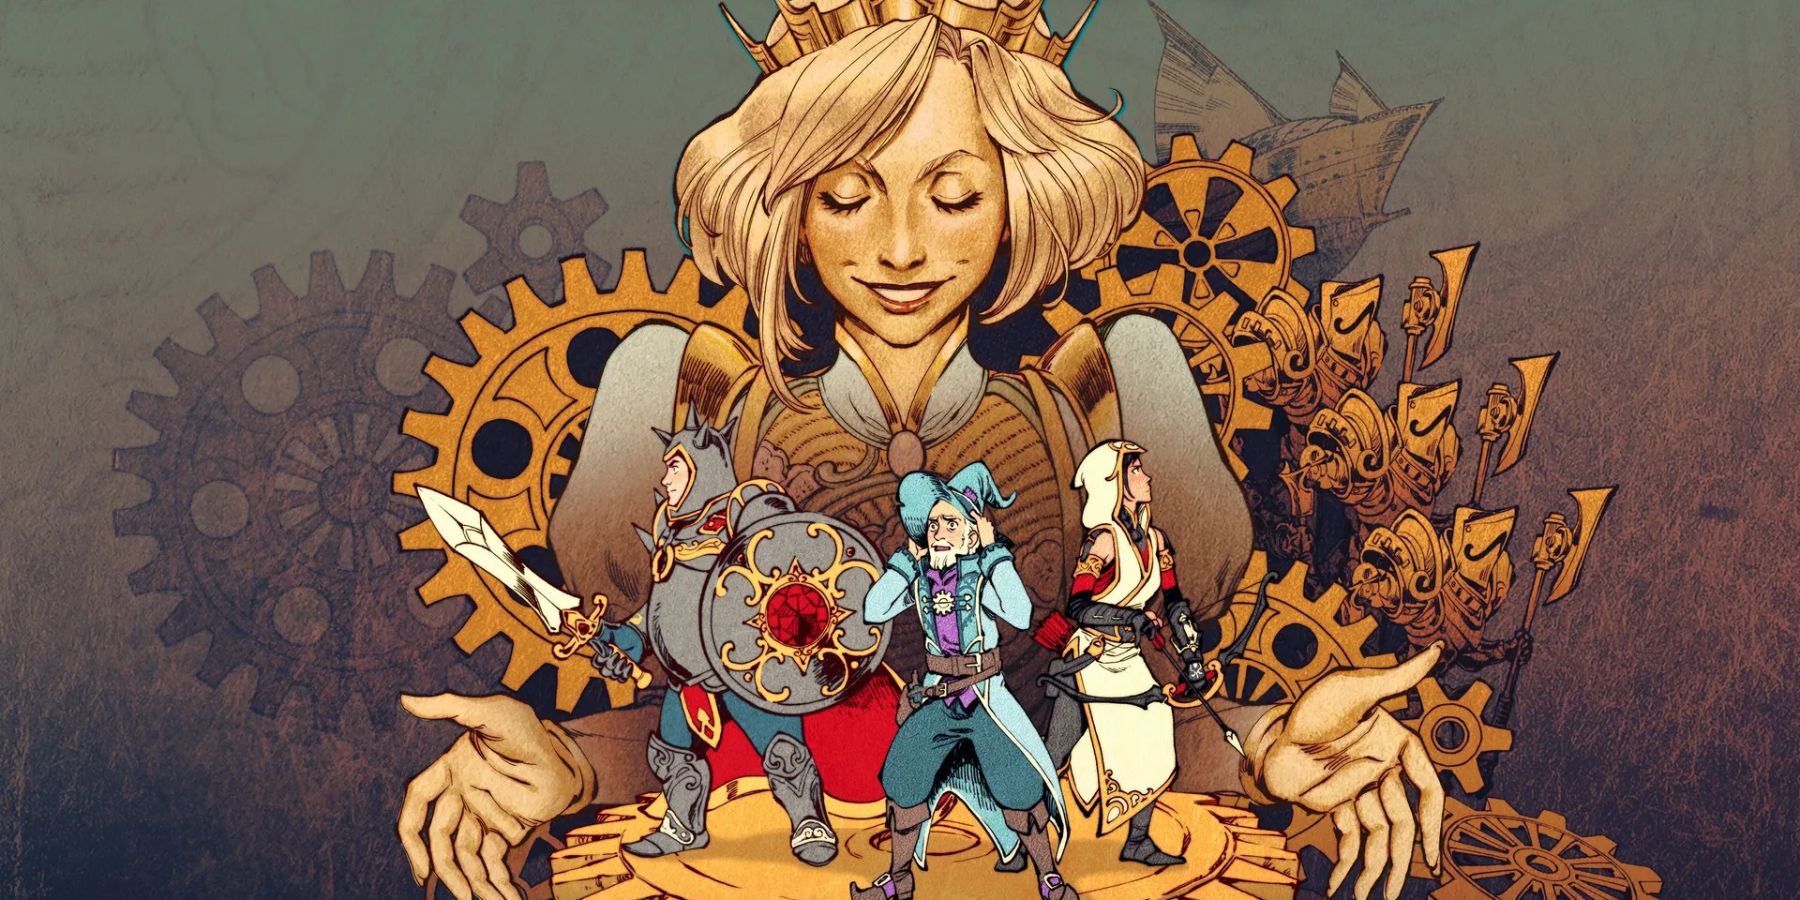 The key art for Trine 5: A Clockwork Conspiracy, showing a crowned woman holding her hands around a clockwork gear, on top of which are three other characters - Amadeus the Wizard, Zoya the Thief, and Pontius the Knight.